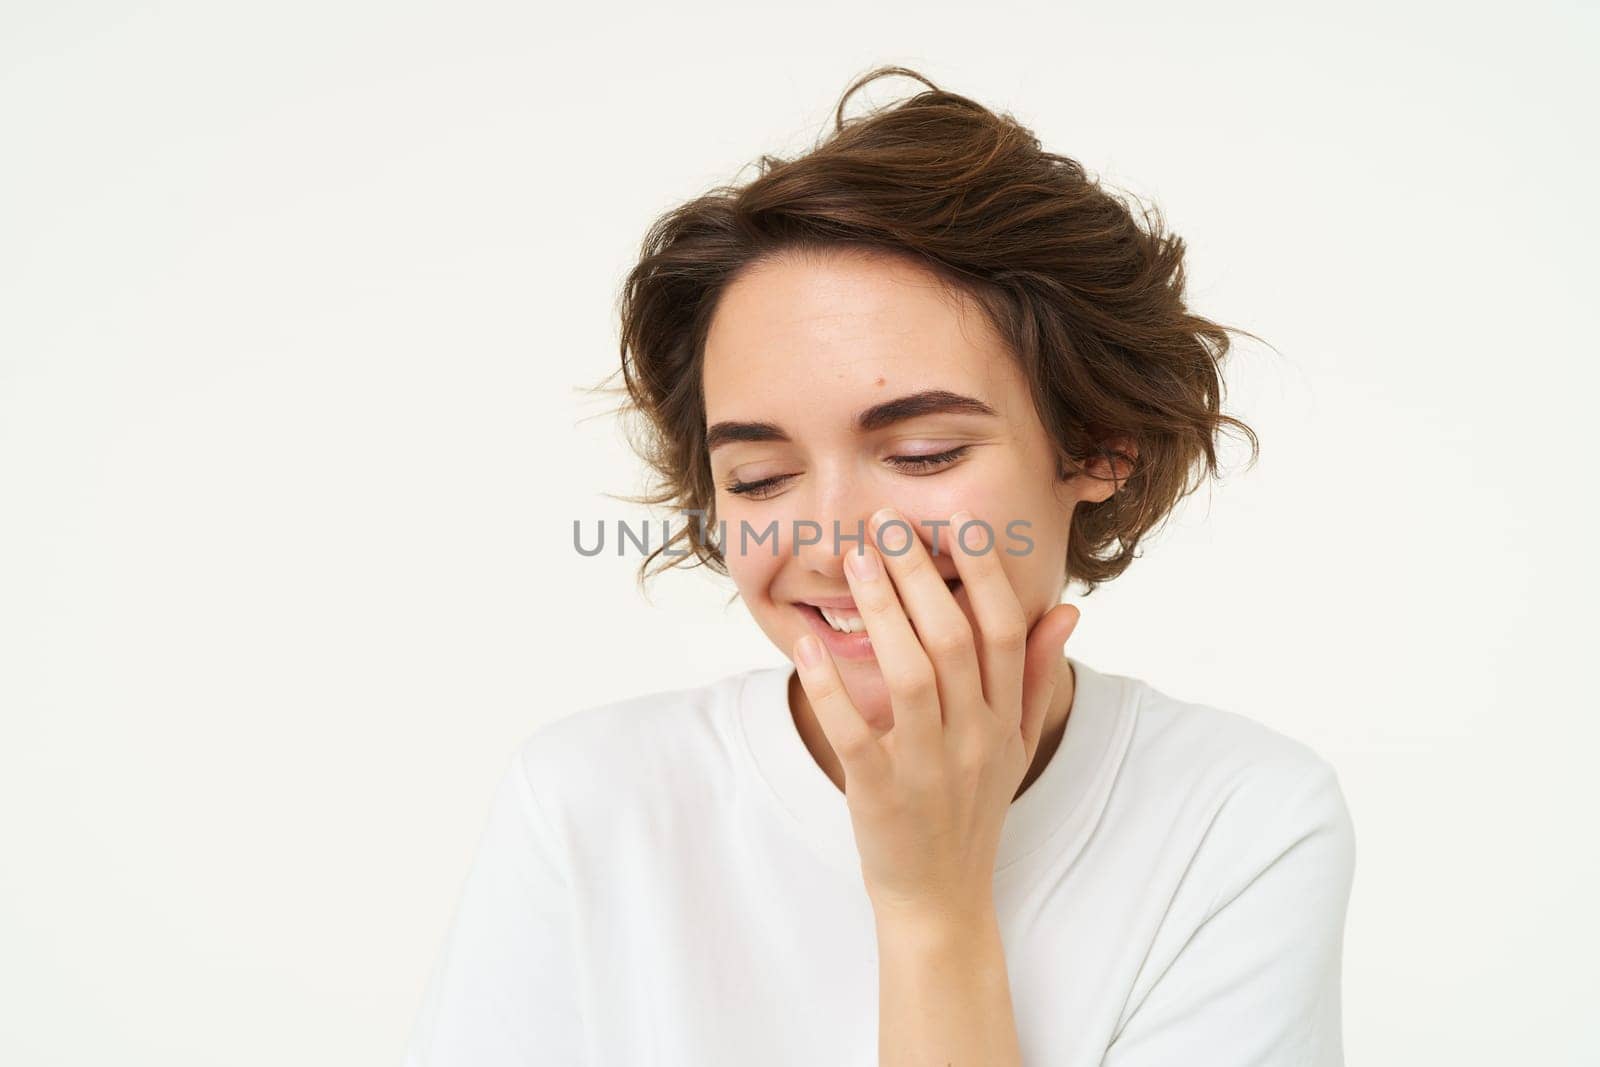 Portrait of brunette woman laughing, smiling and covering face with hand, looking shy and cute, standing over white background. Copy space